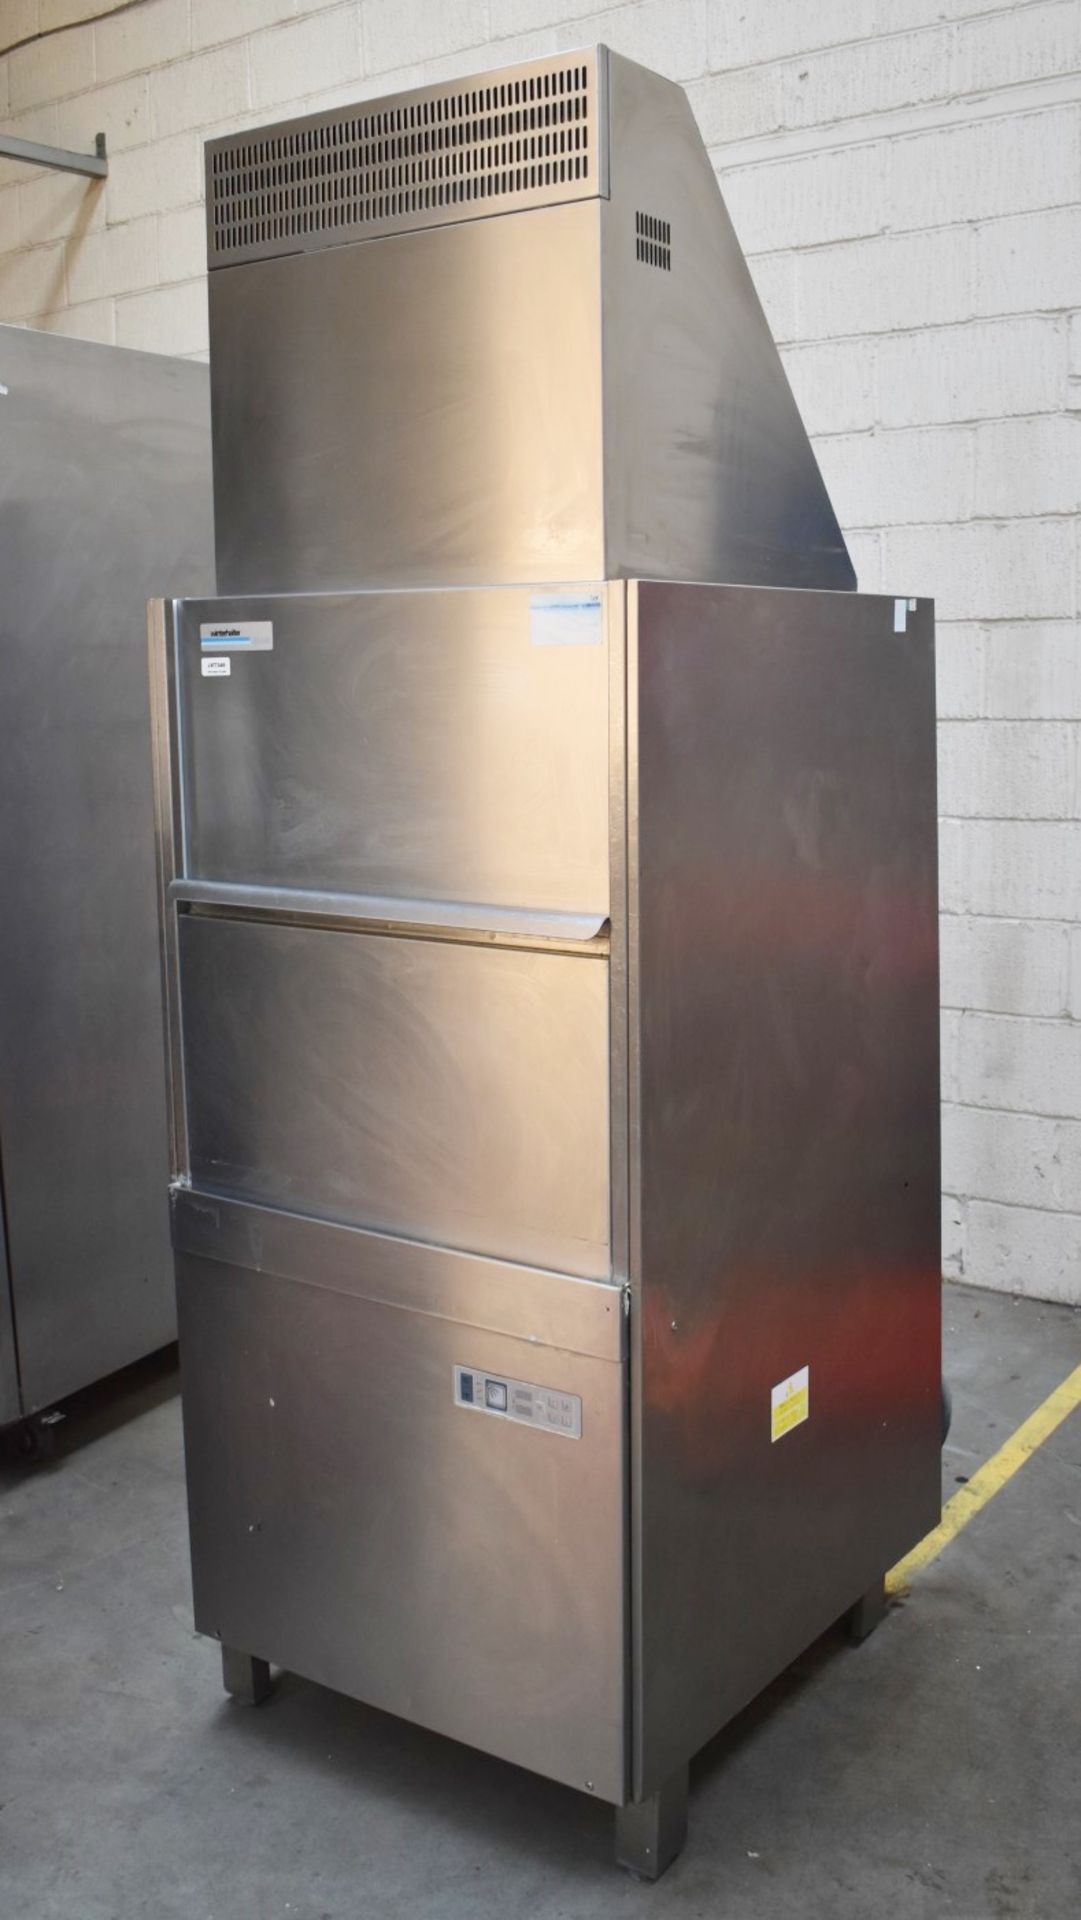 1 x Winterhalter GS640 Utensil Pot Washer - 3 Phase - Original RRP Approx £13,000 - Image 9 of 11